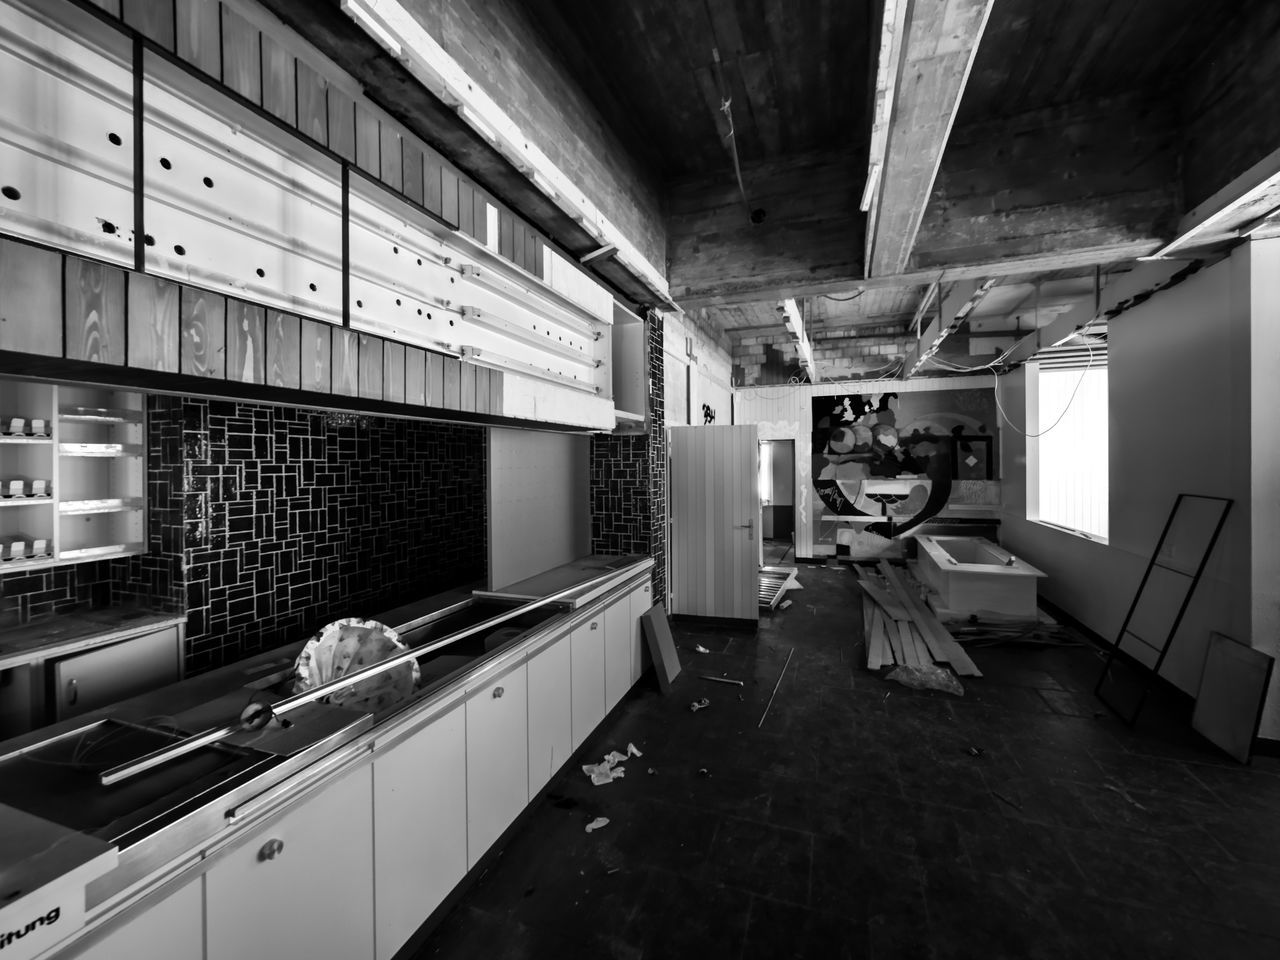 indoors, room, interior design, monochrome, black and white, architecture, domestic room, home, black, monochrome photography, sink, no people, house, built structure, flooring, kitchen, white, home interior, appliance, building, furniture, domestic kitchen